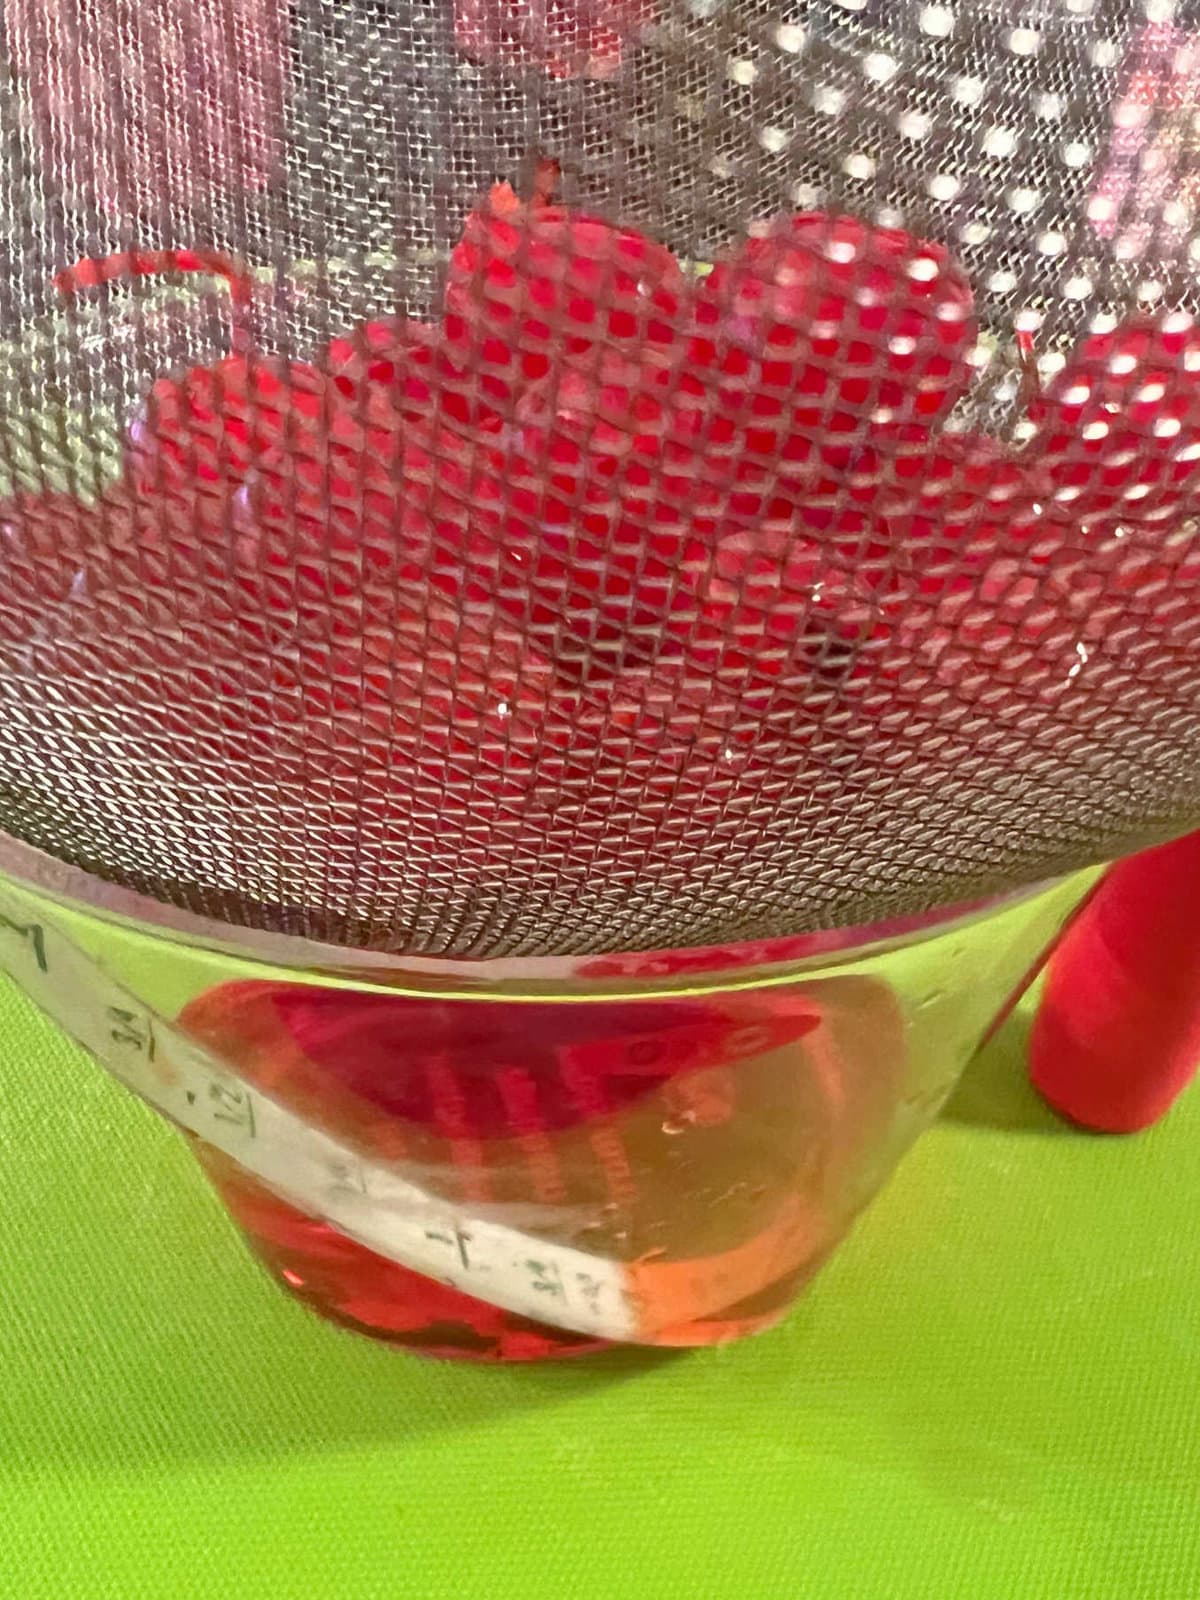 Draining maraschino juice from the cherries using a sifter over a bowl